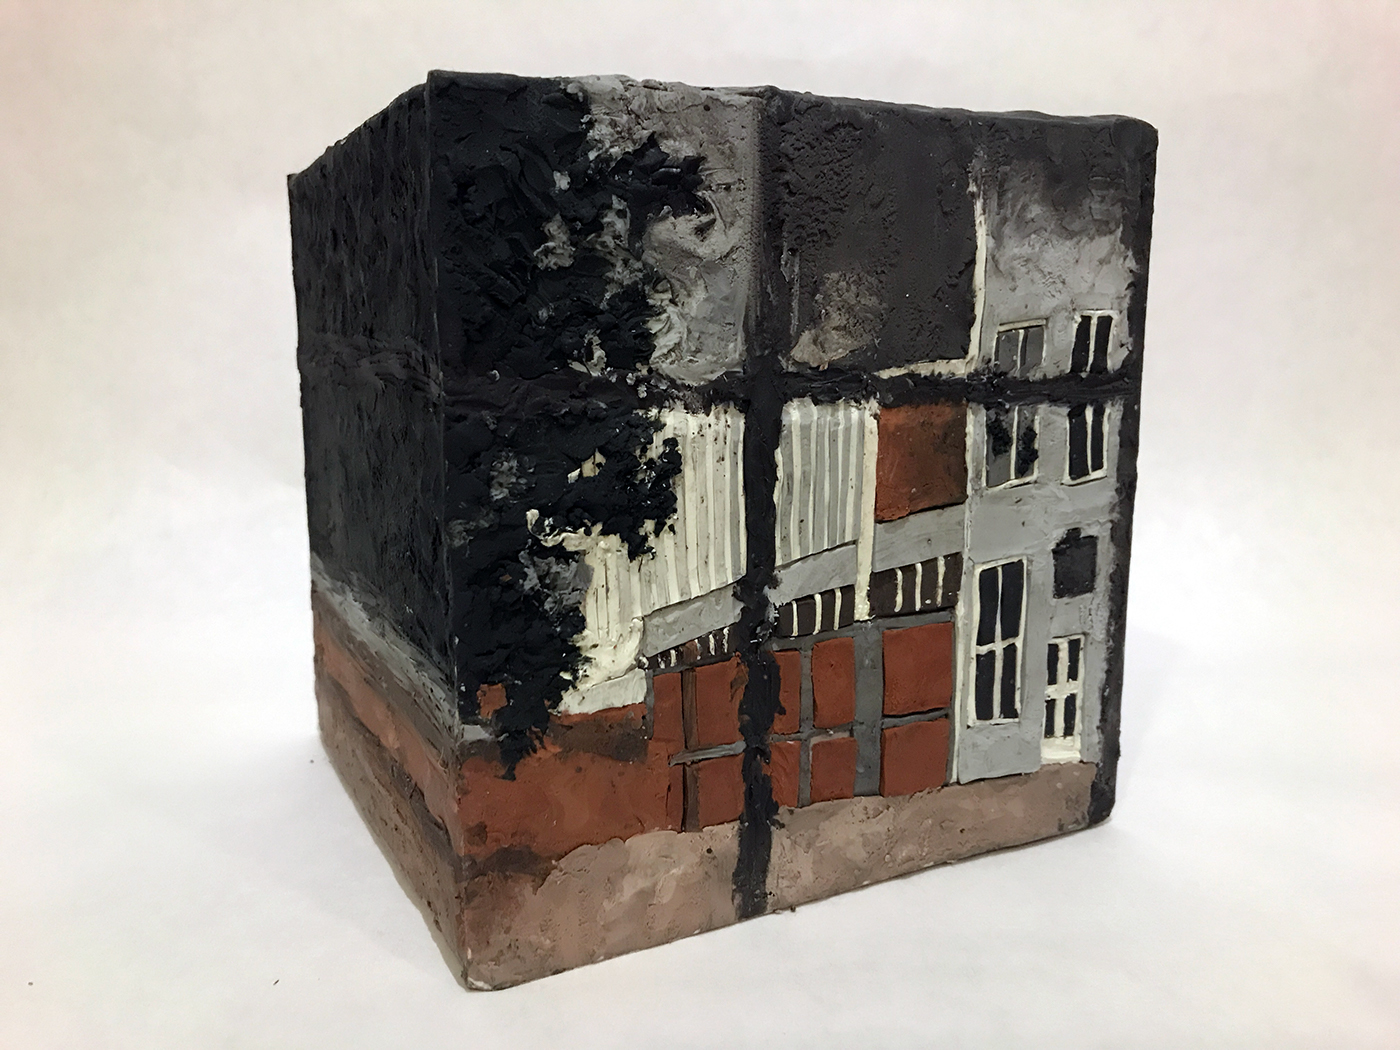 camera obscura clay sculpture projection camera clay sculpture projection art